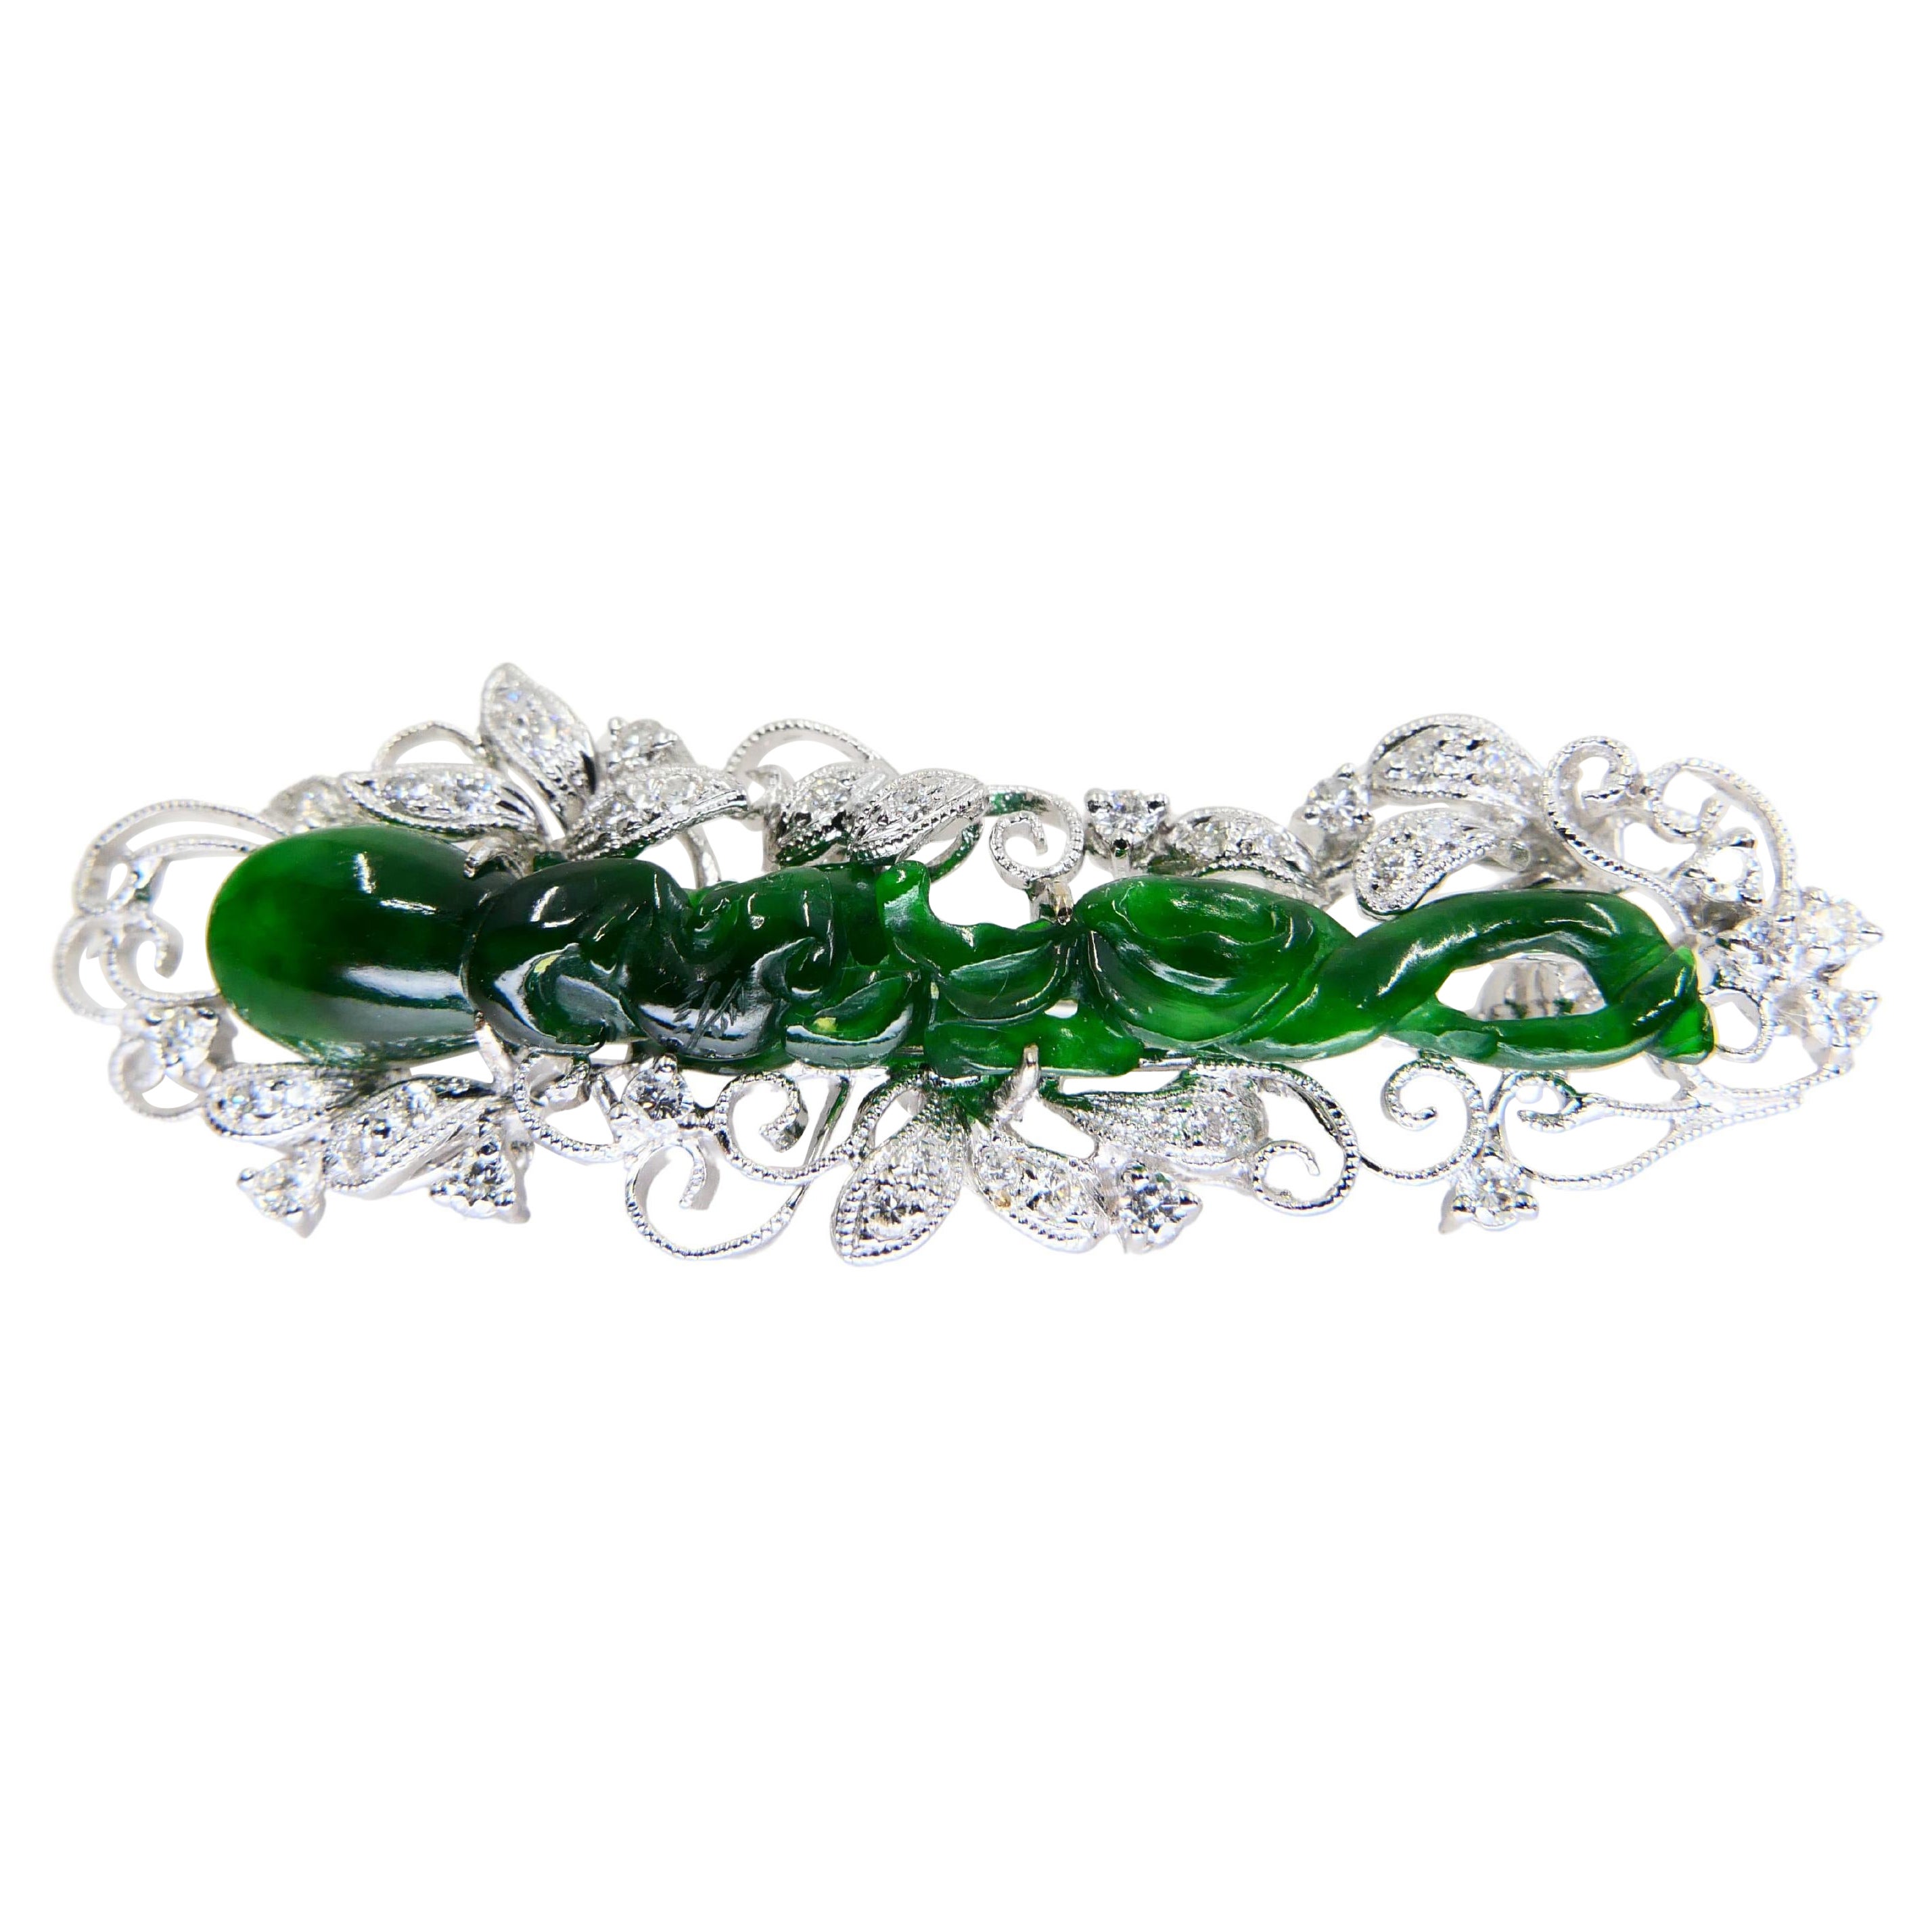 Certified Intense Green Carved Jade & Diamond Brooch, Close to Imperial Green